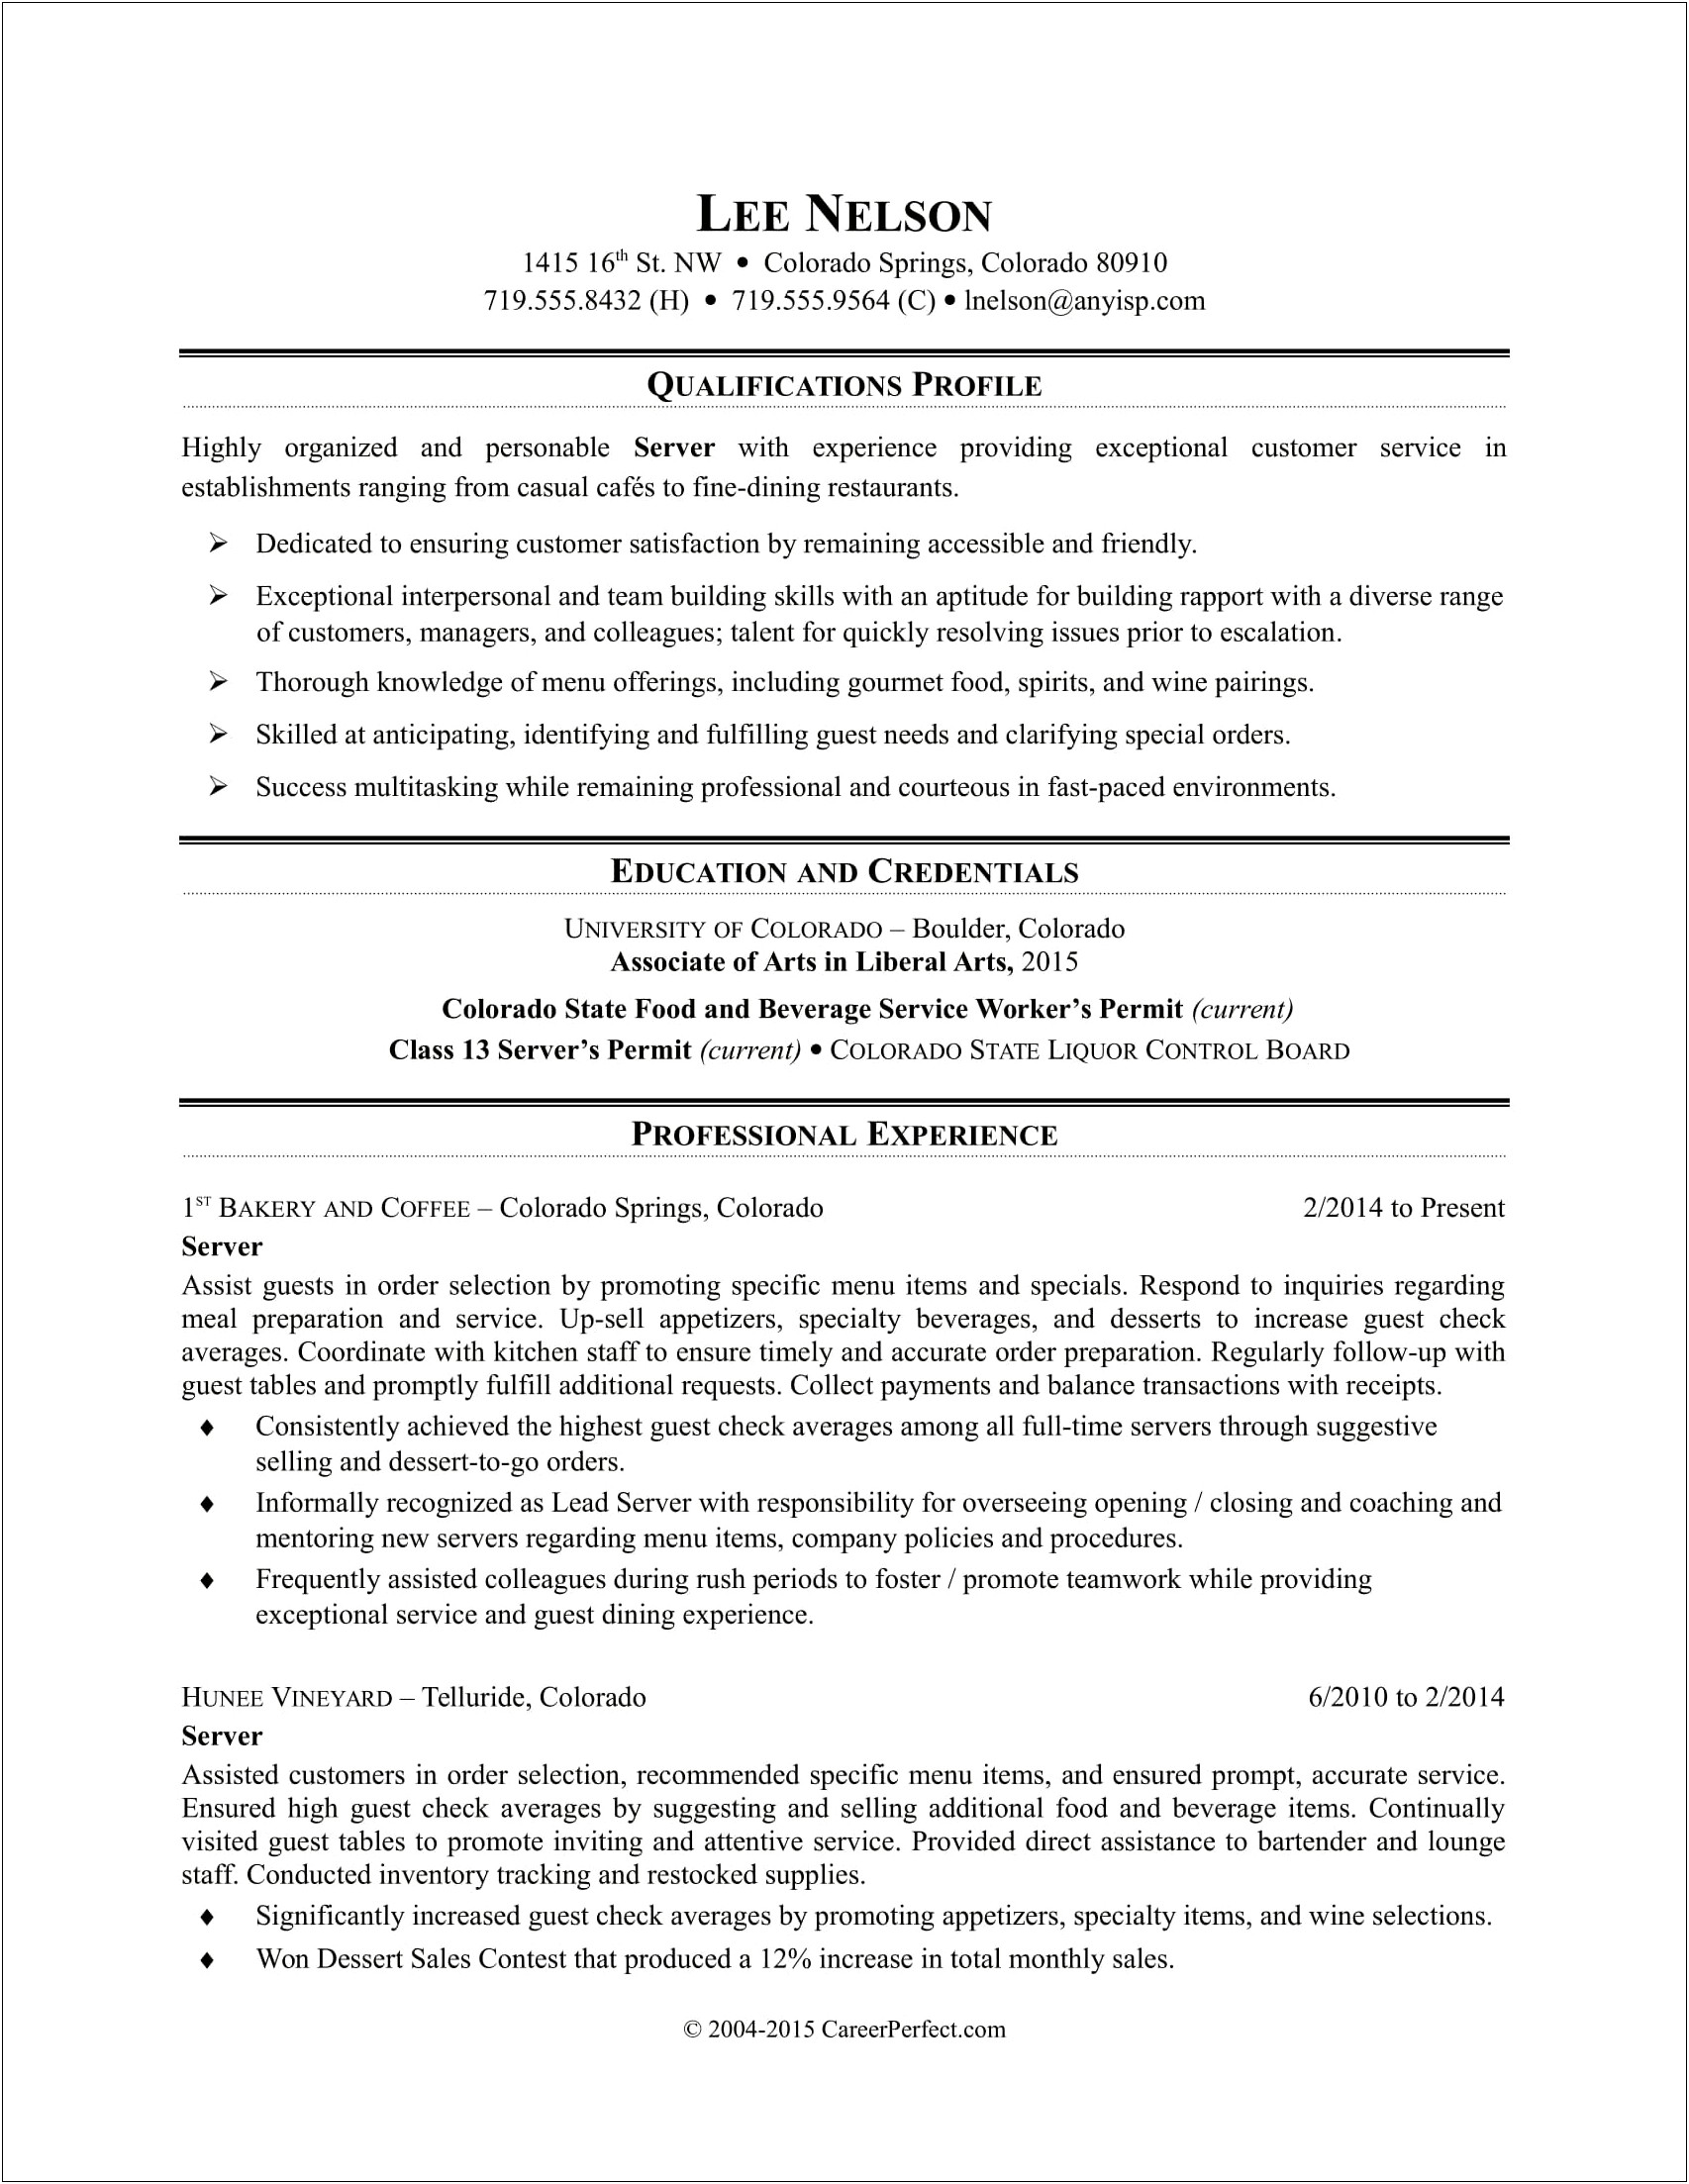 Server Qualifications And Skills For Resume